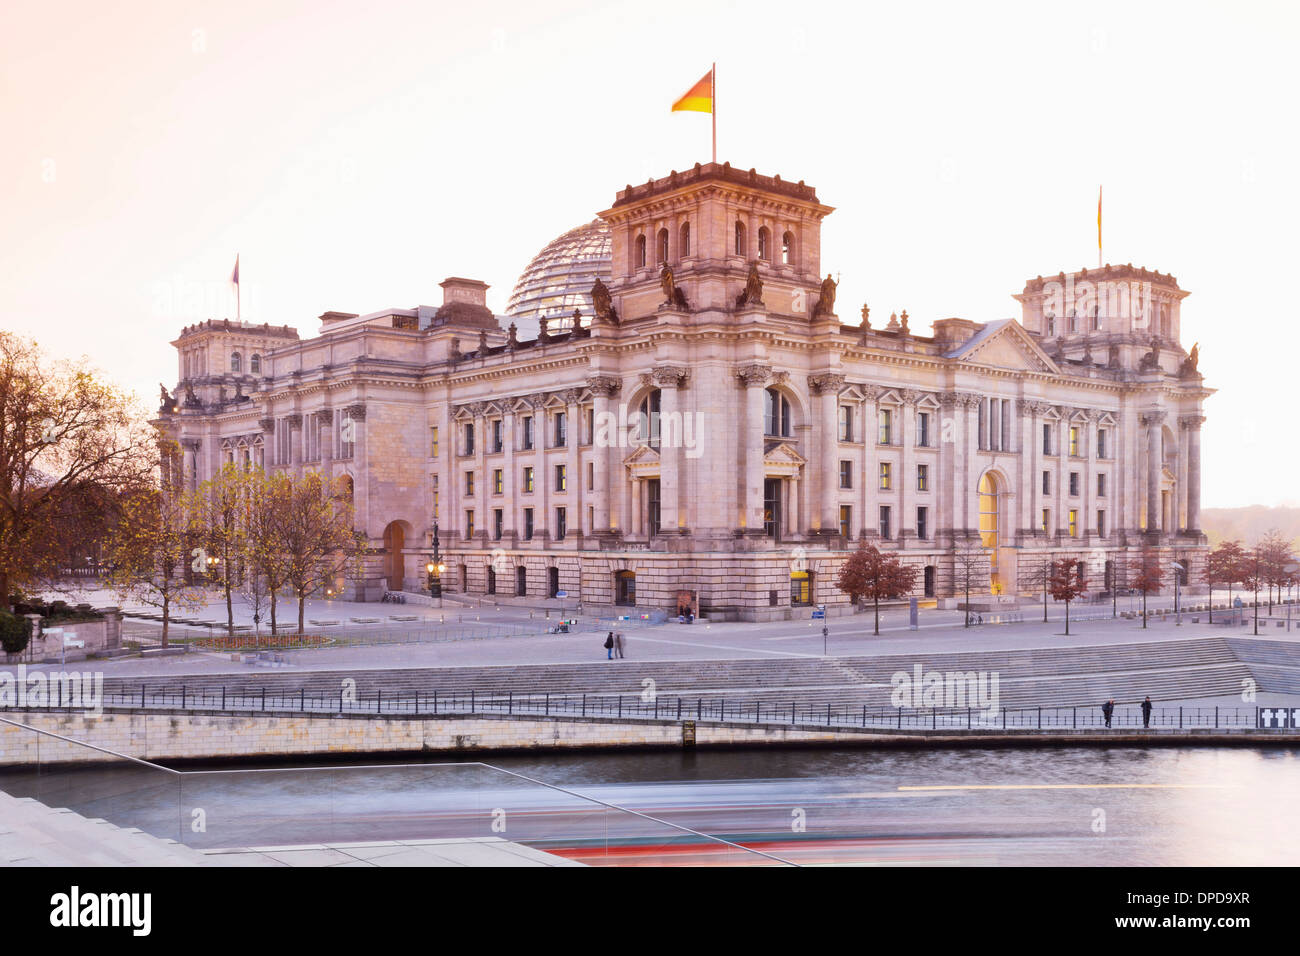 Germany, Berlin, View of Reichstag parliament building in the evening Stock Photo